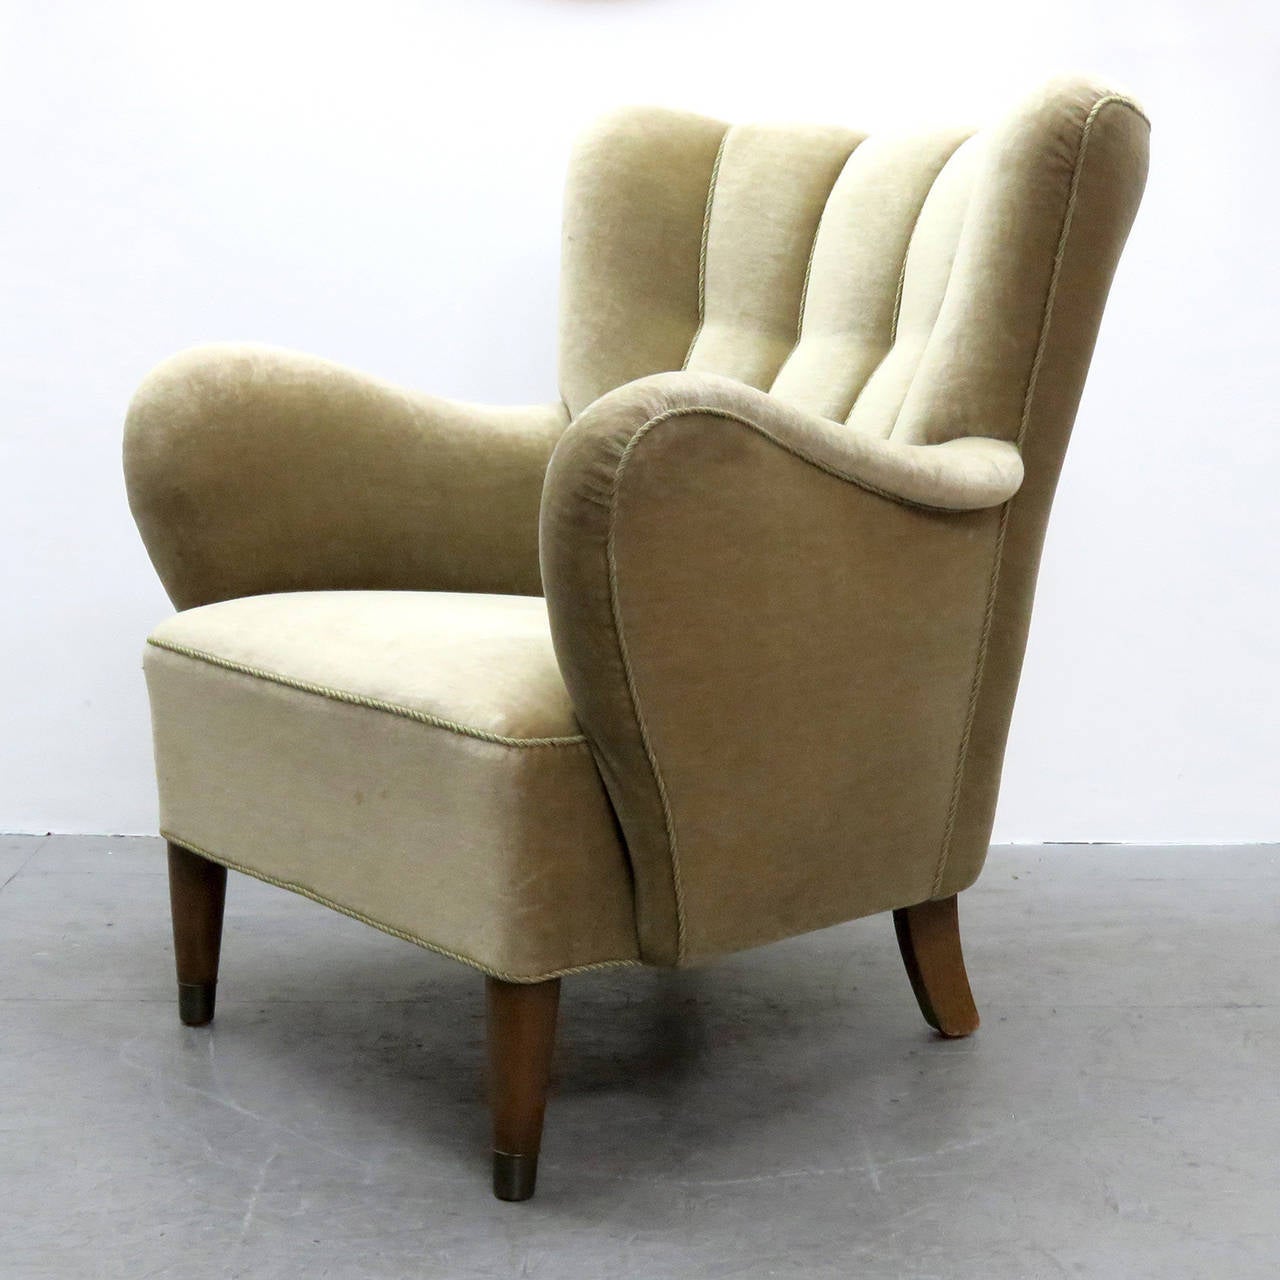 Comfortable, channeled Danish mohair club chair with teak legs finished with brass caps.